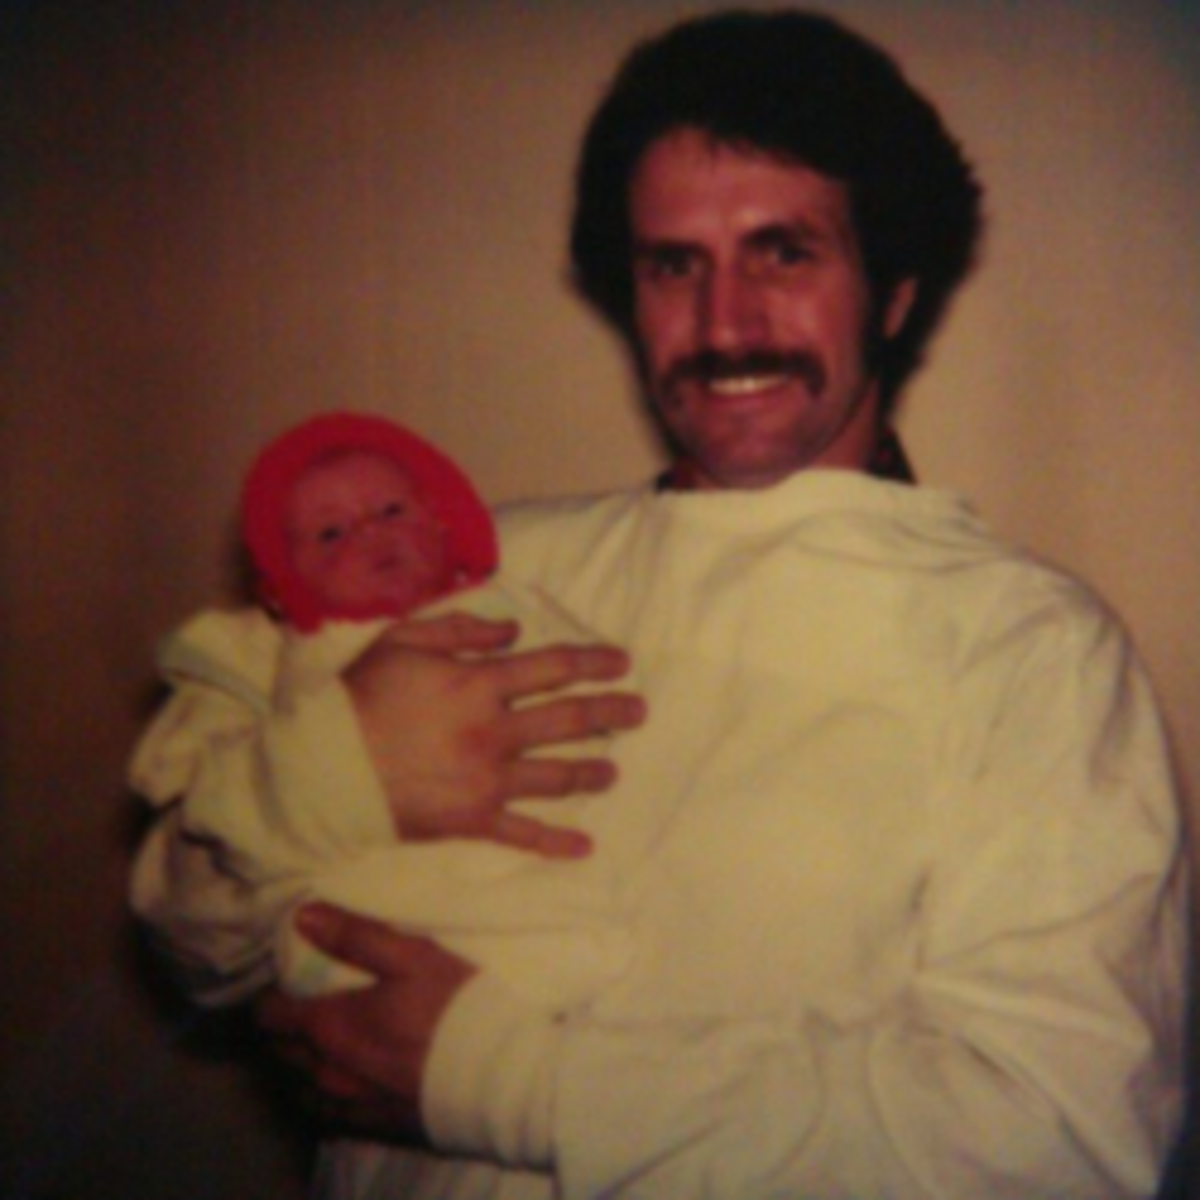 My Father and I. December 23, 1980, the day I was born.